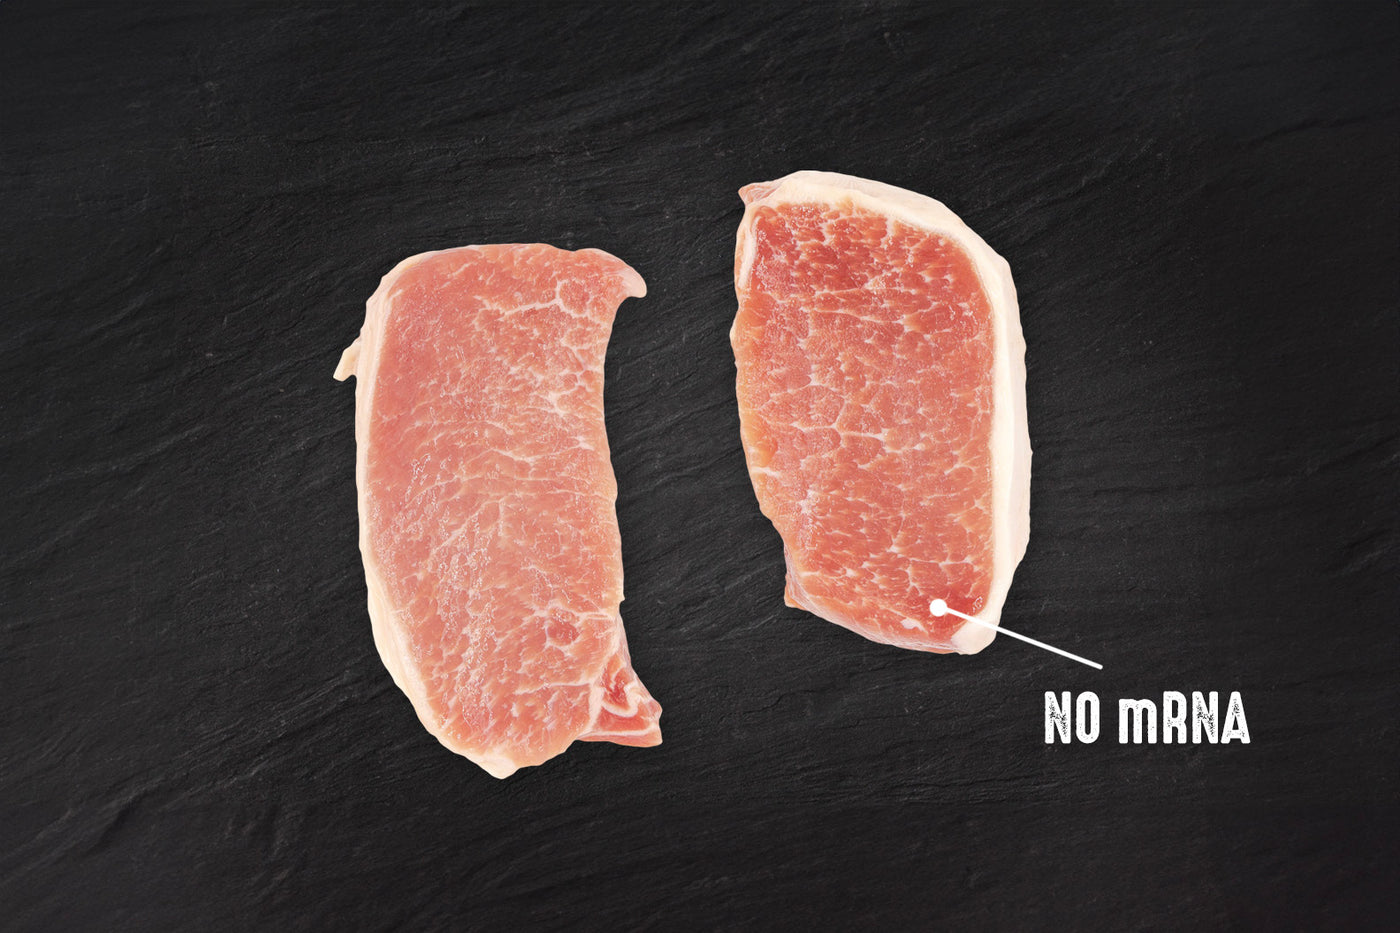 Two raw thick cut pork chops sit on a black slate background. There is an arrow pointing to the pork chops and text that reads No mRNA in meat.